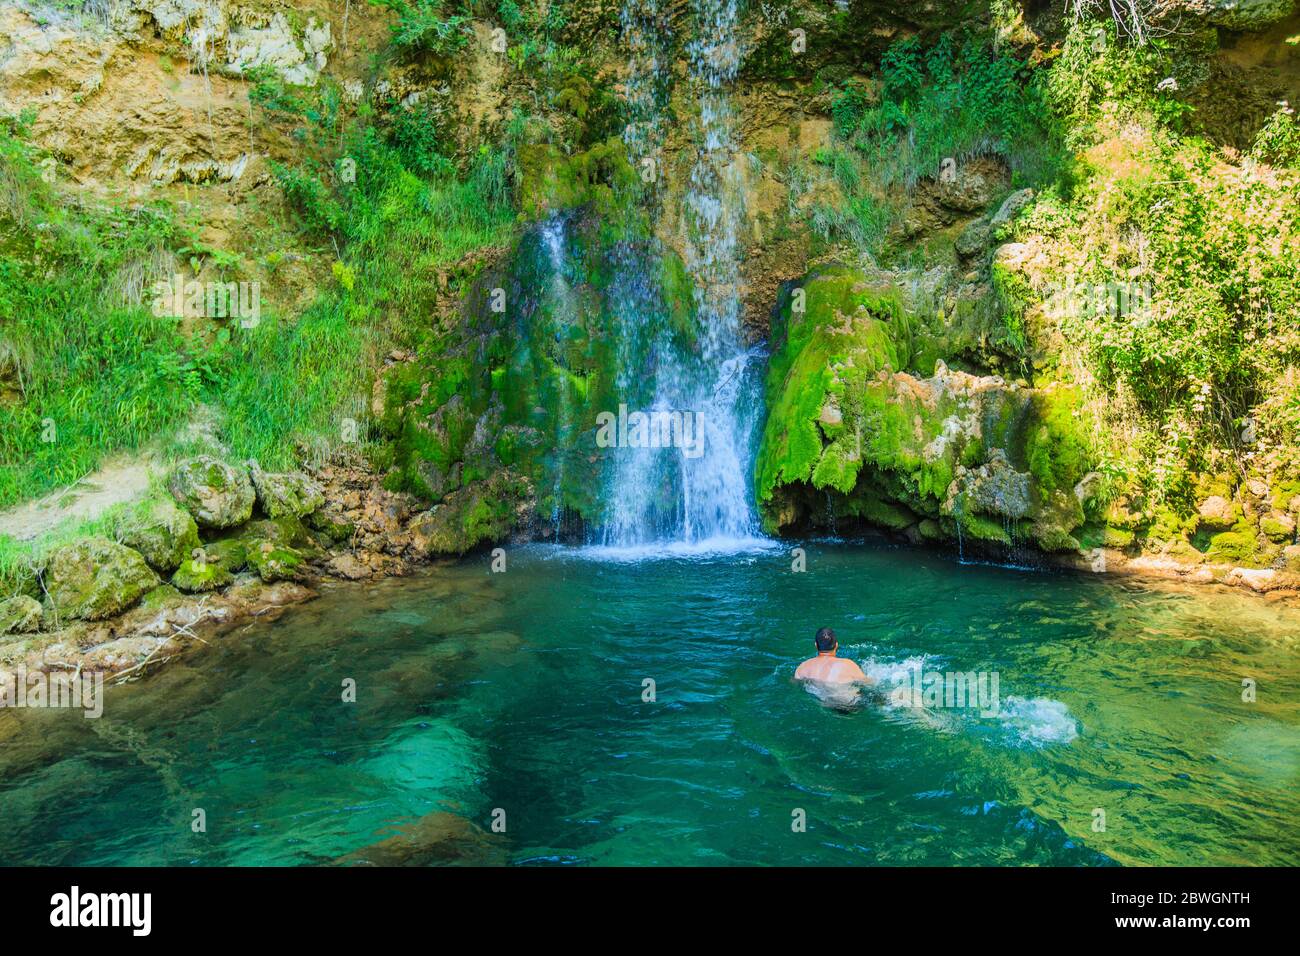 https://c8.alamy.com/comp/2BWGNTH/man-swimming-in-clear-and-cold-water-in-natural-pool-under-waterfall-at-forest-refresh-on-summer-hot-day-in-nature-serbia-europe-2BWGNTH.jpg